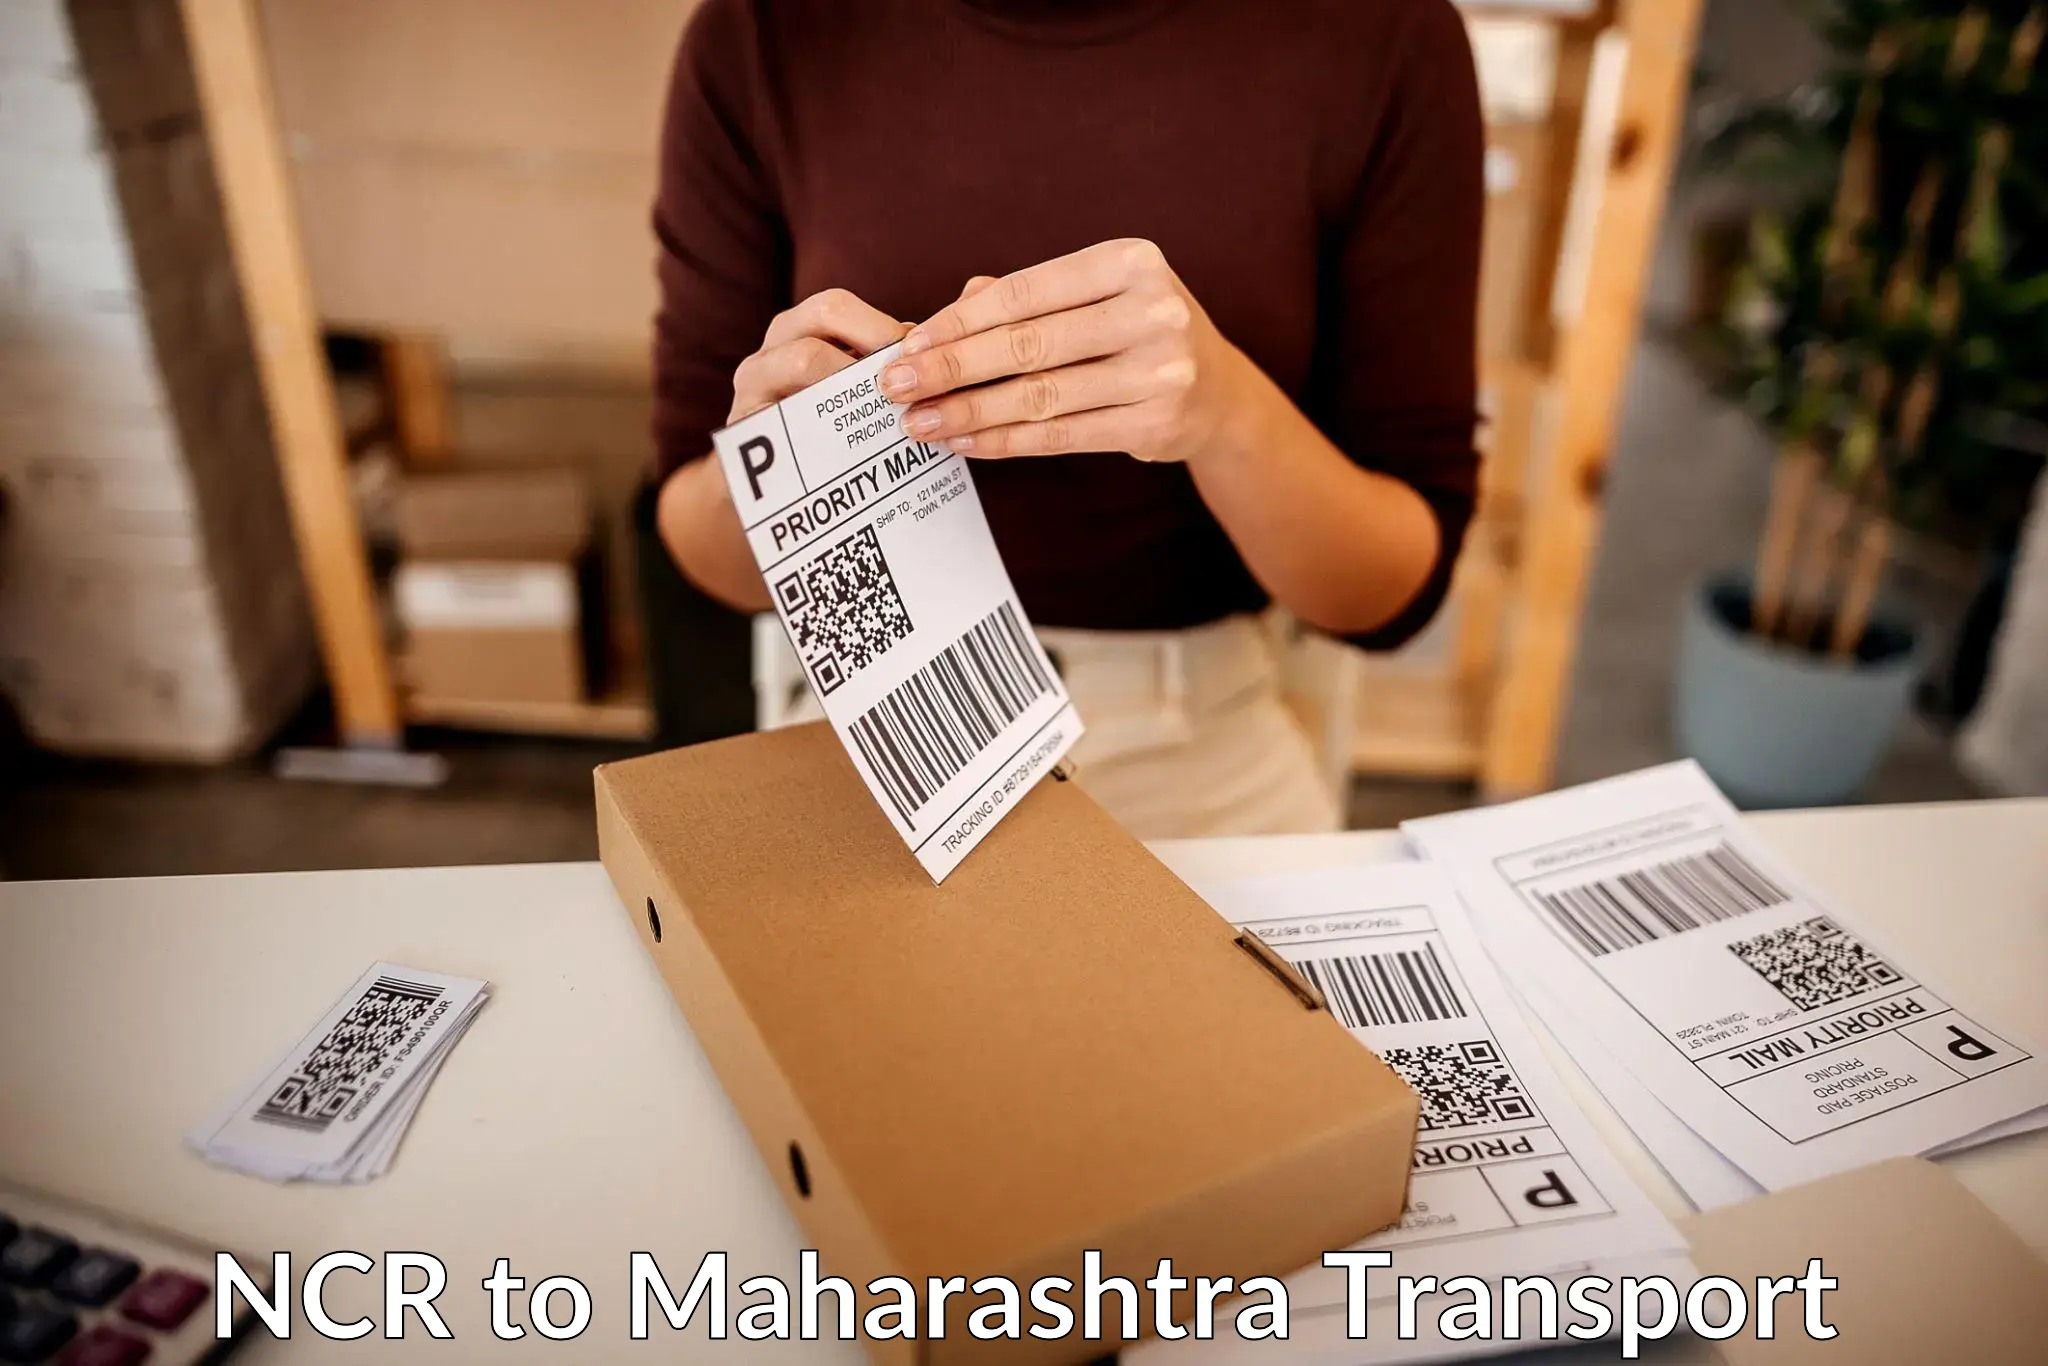 Parcel transport services NCR to Mahur